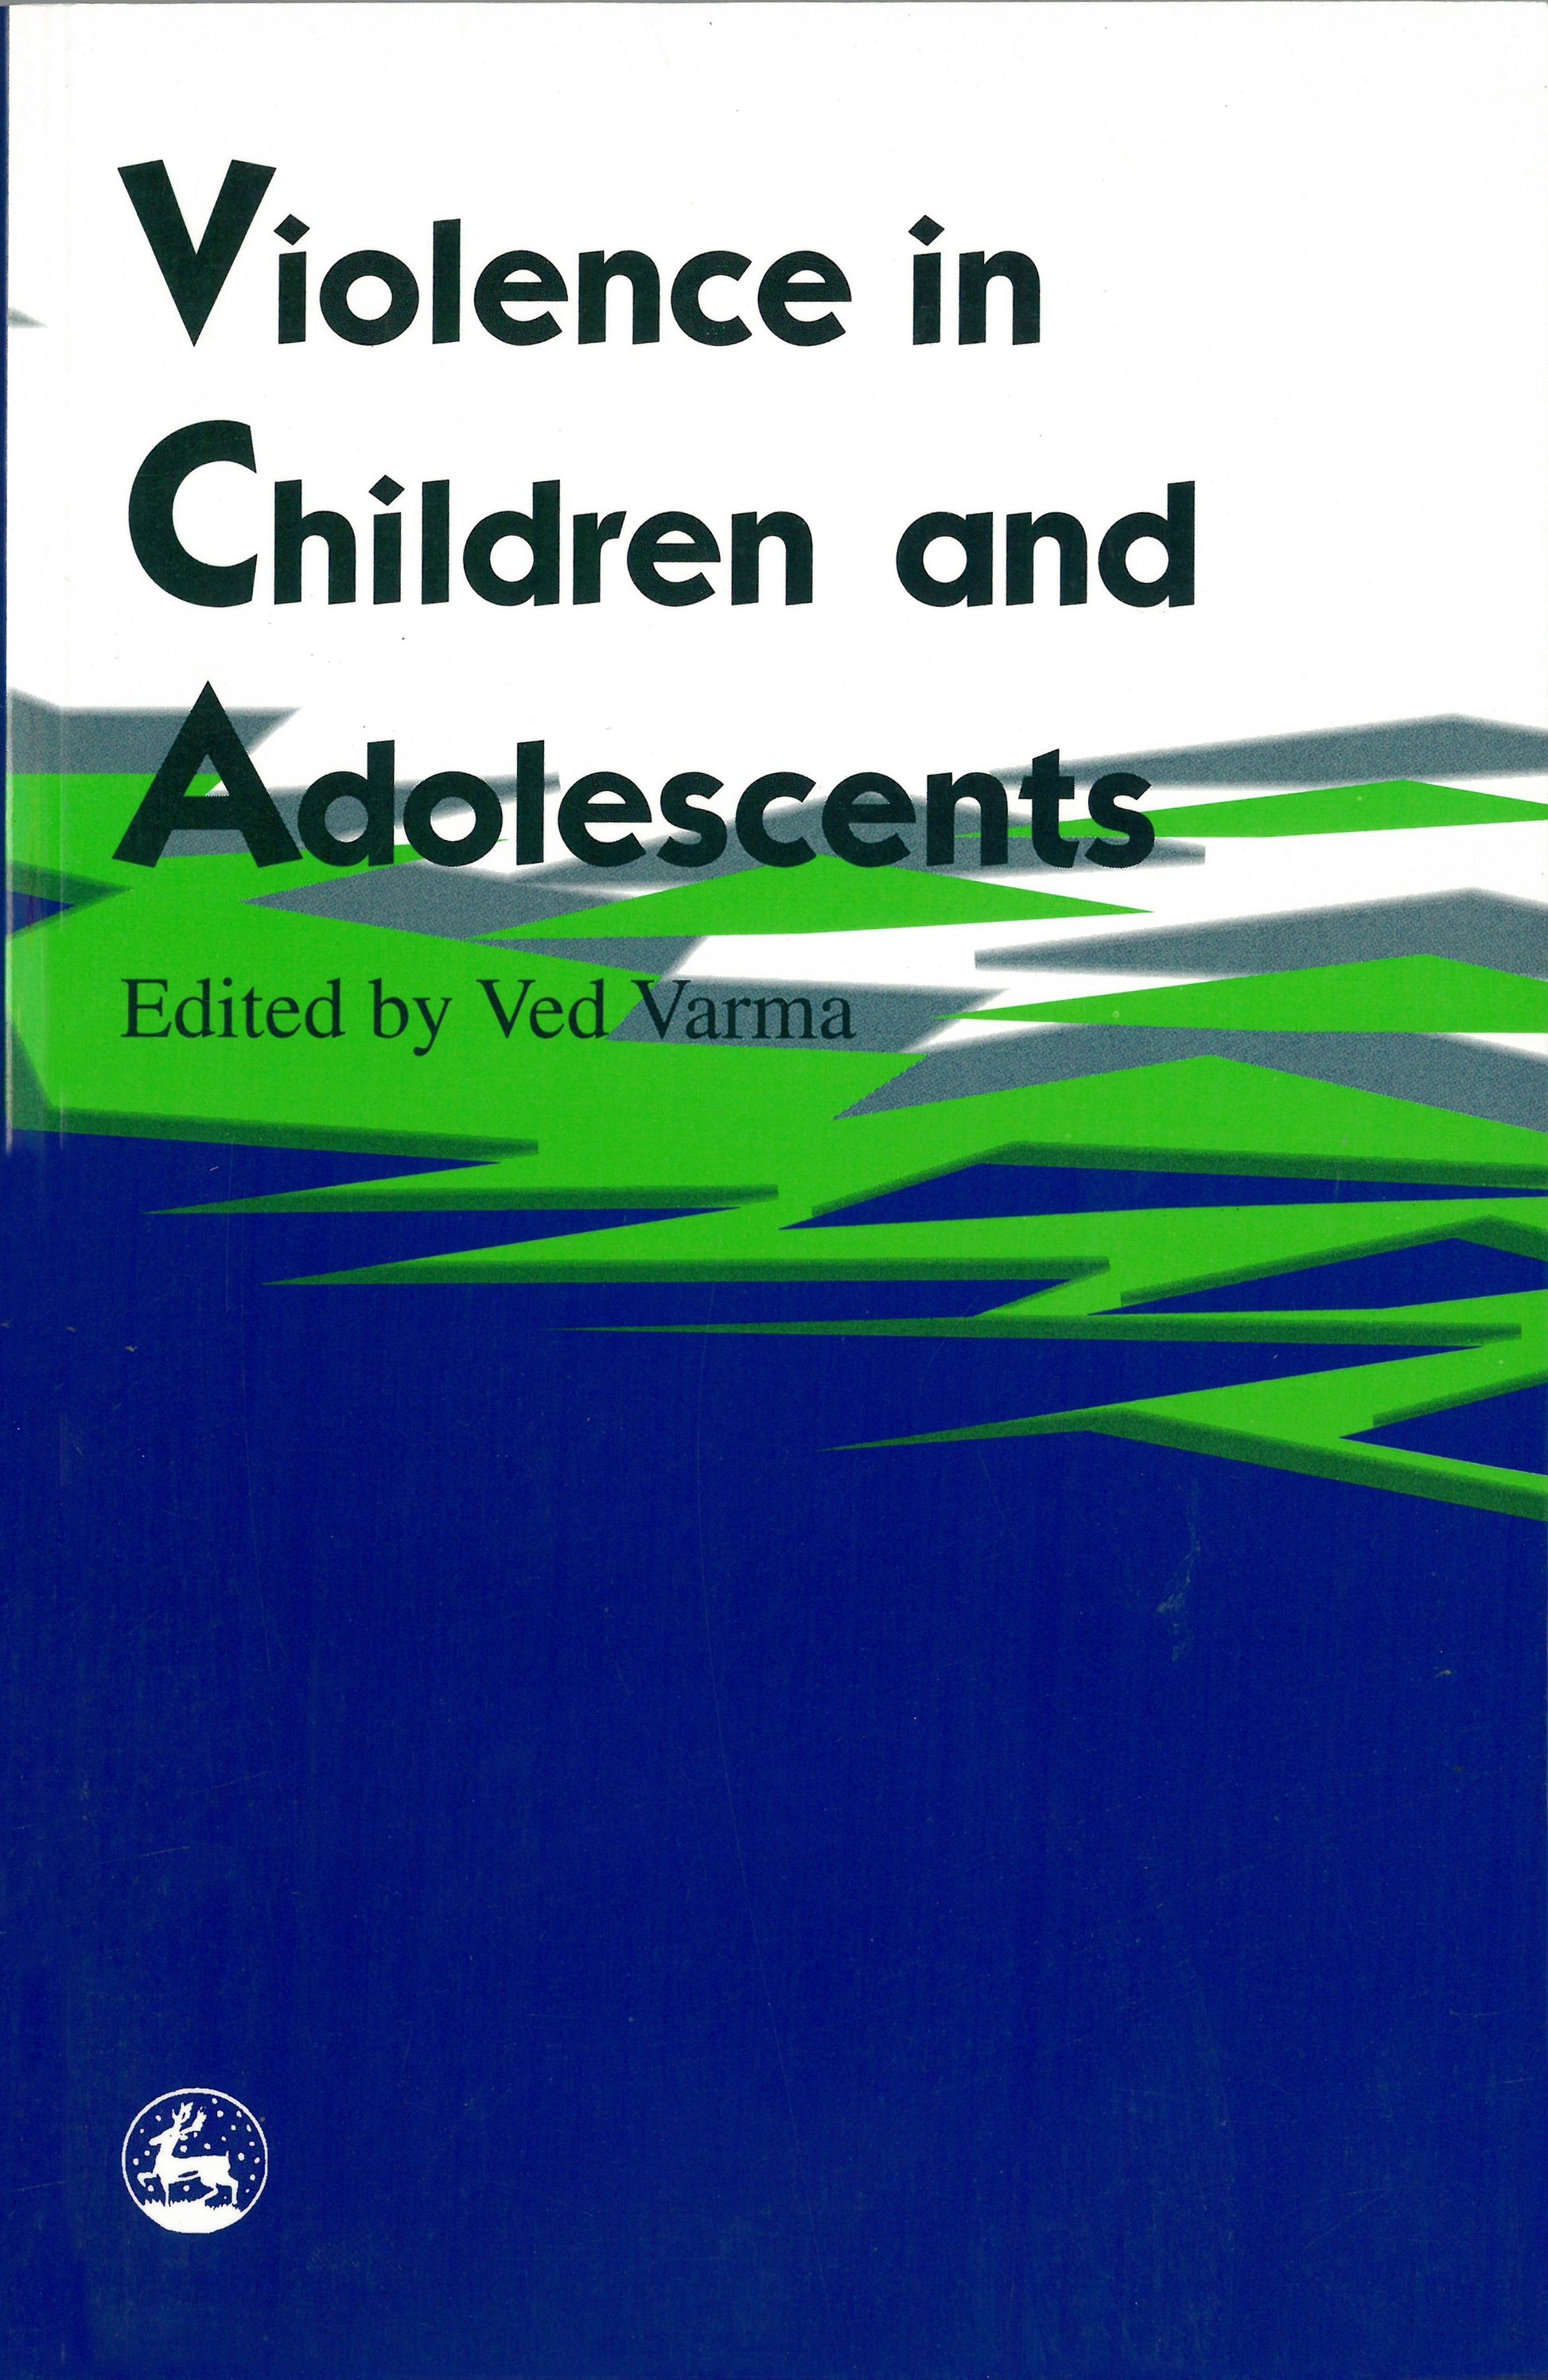 Violence in Children and Adolescents by Ved P Varma